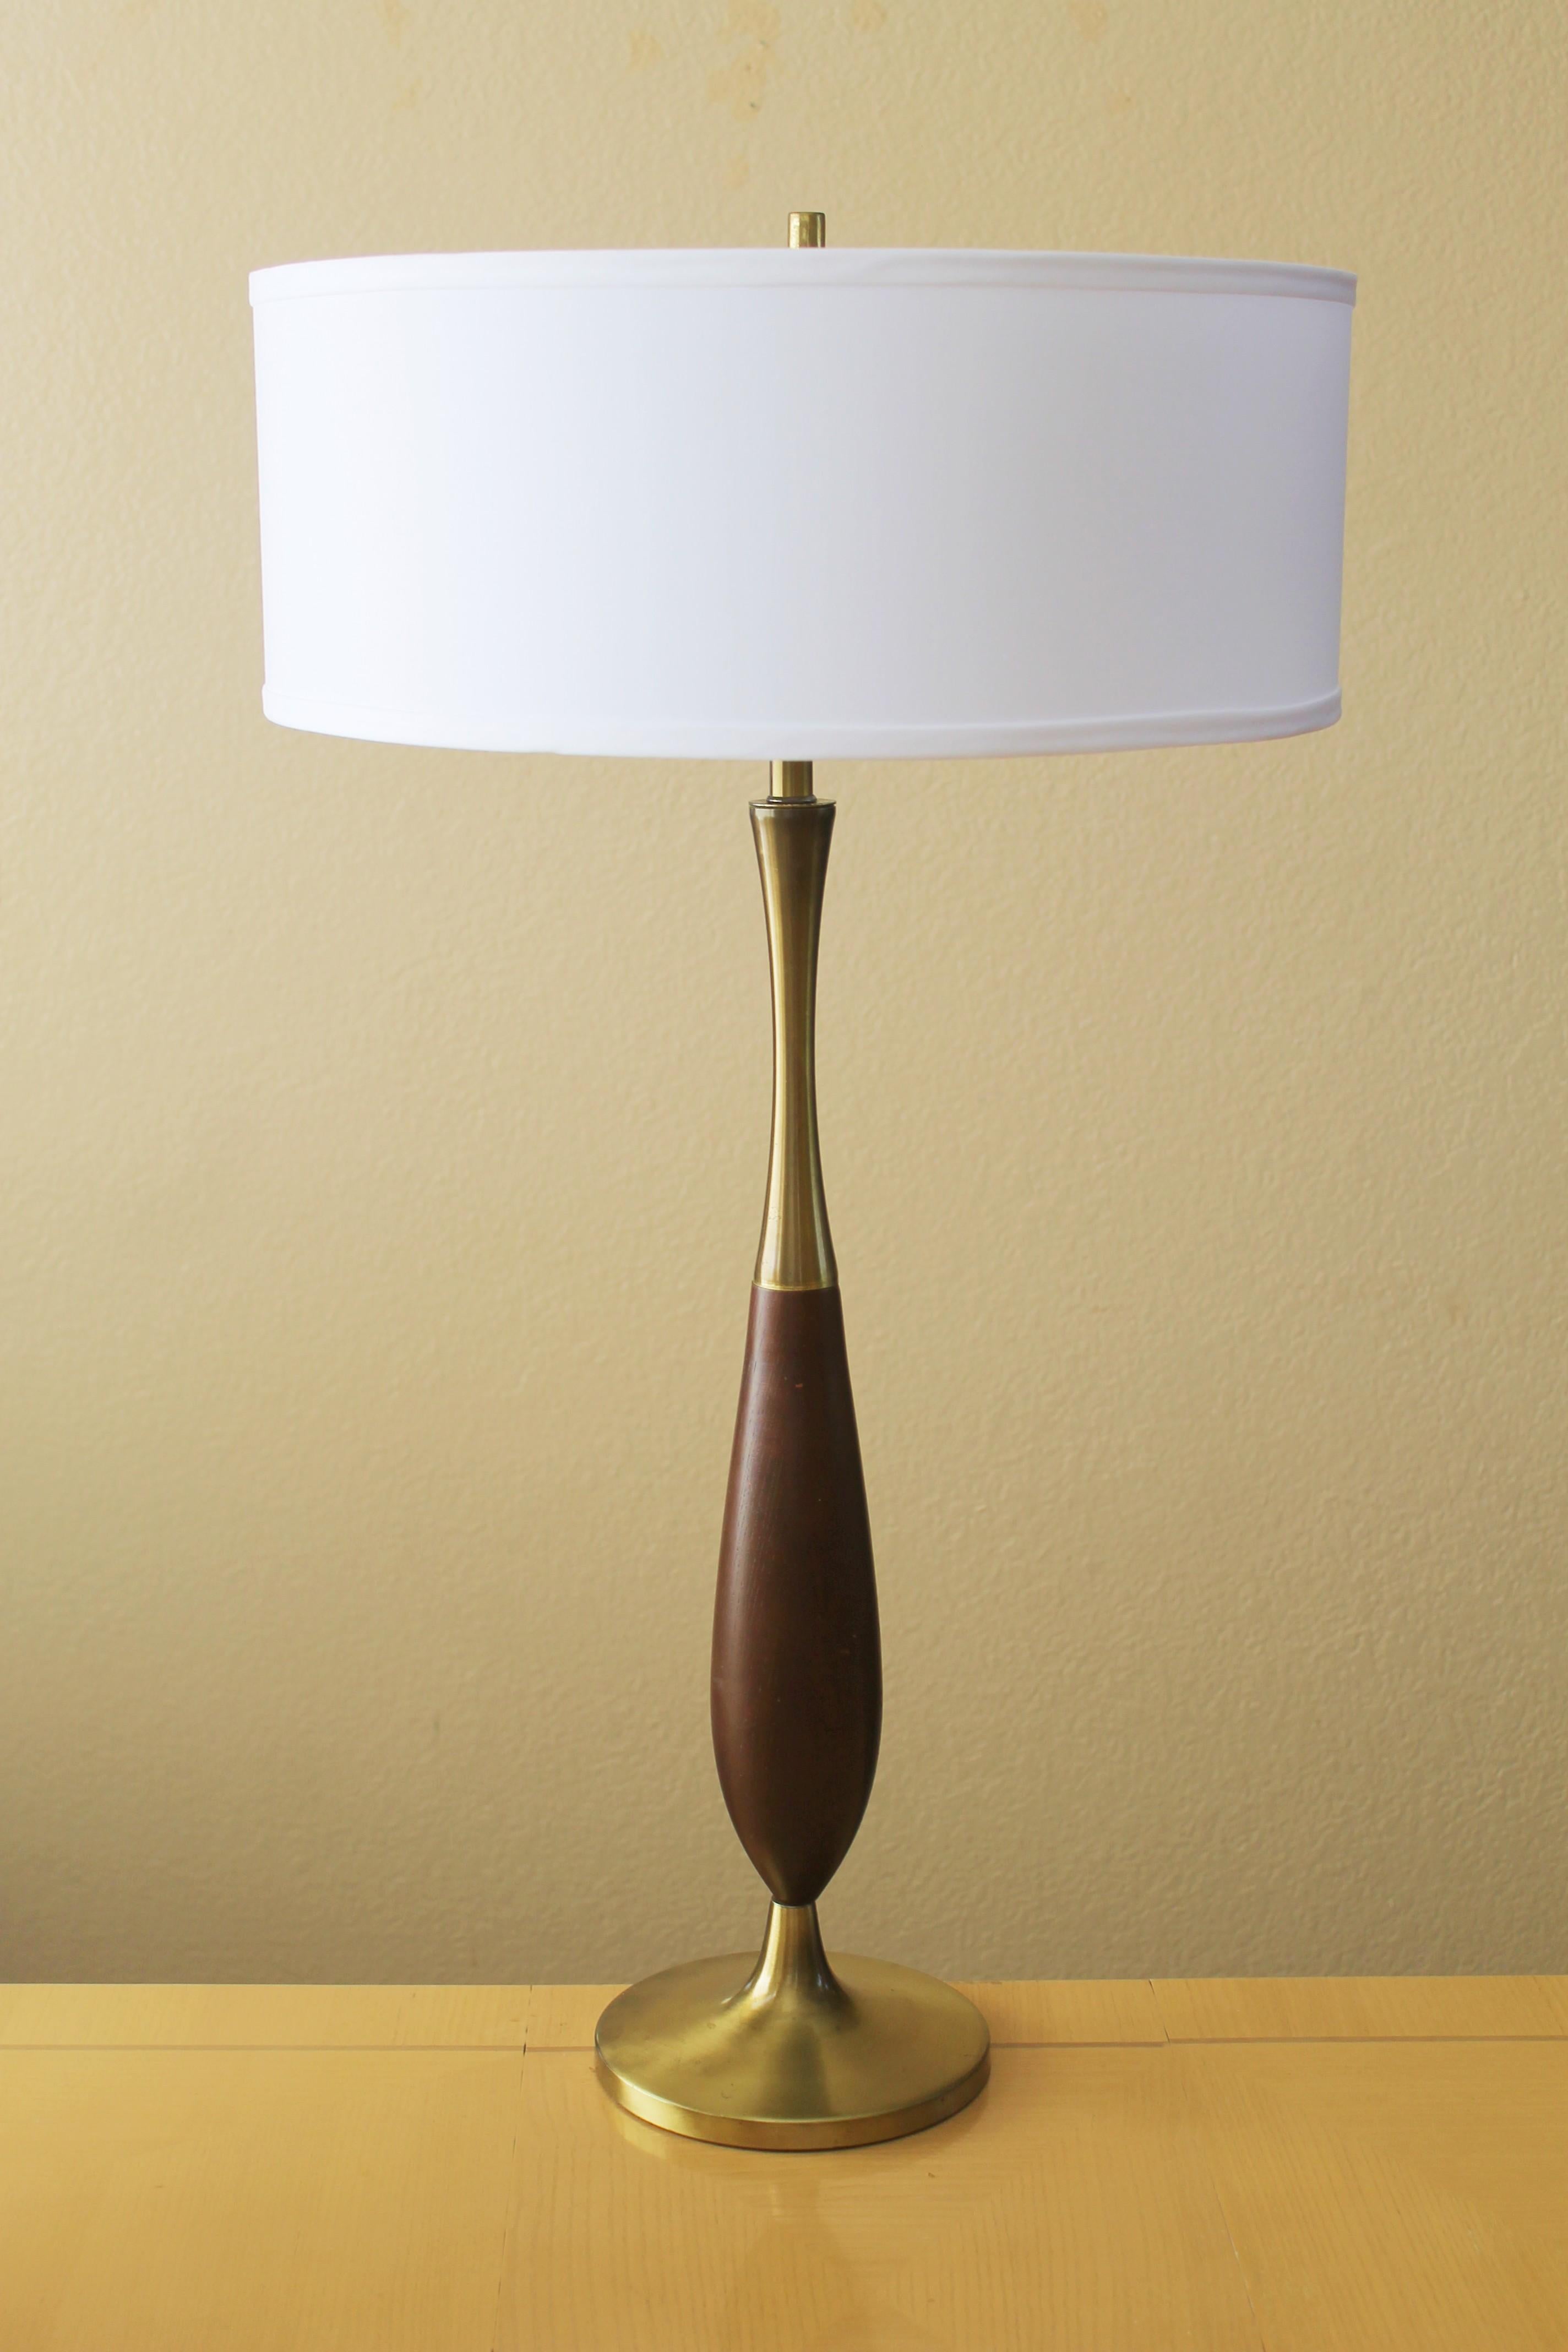 GORGEOUS!


  
SCULPTURED DANISH MODERN
SLEEK SHAPED WOOD & BRASS
TABLE LAMP!

SUPER CLEAN LINES & STYLE!

 BEAUTIFUL!

( DIMENSIONS:  APPROX. 33